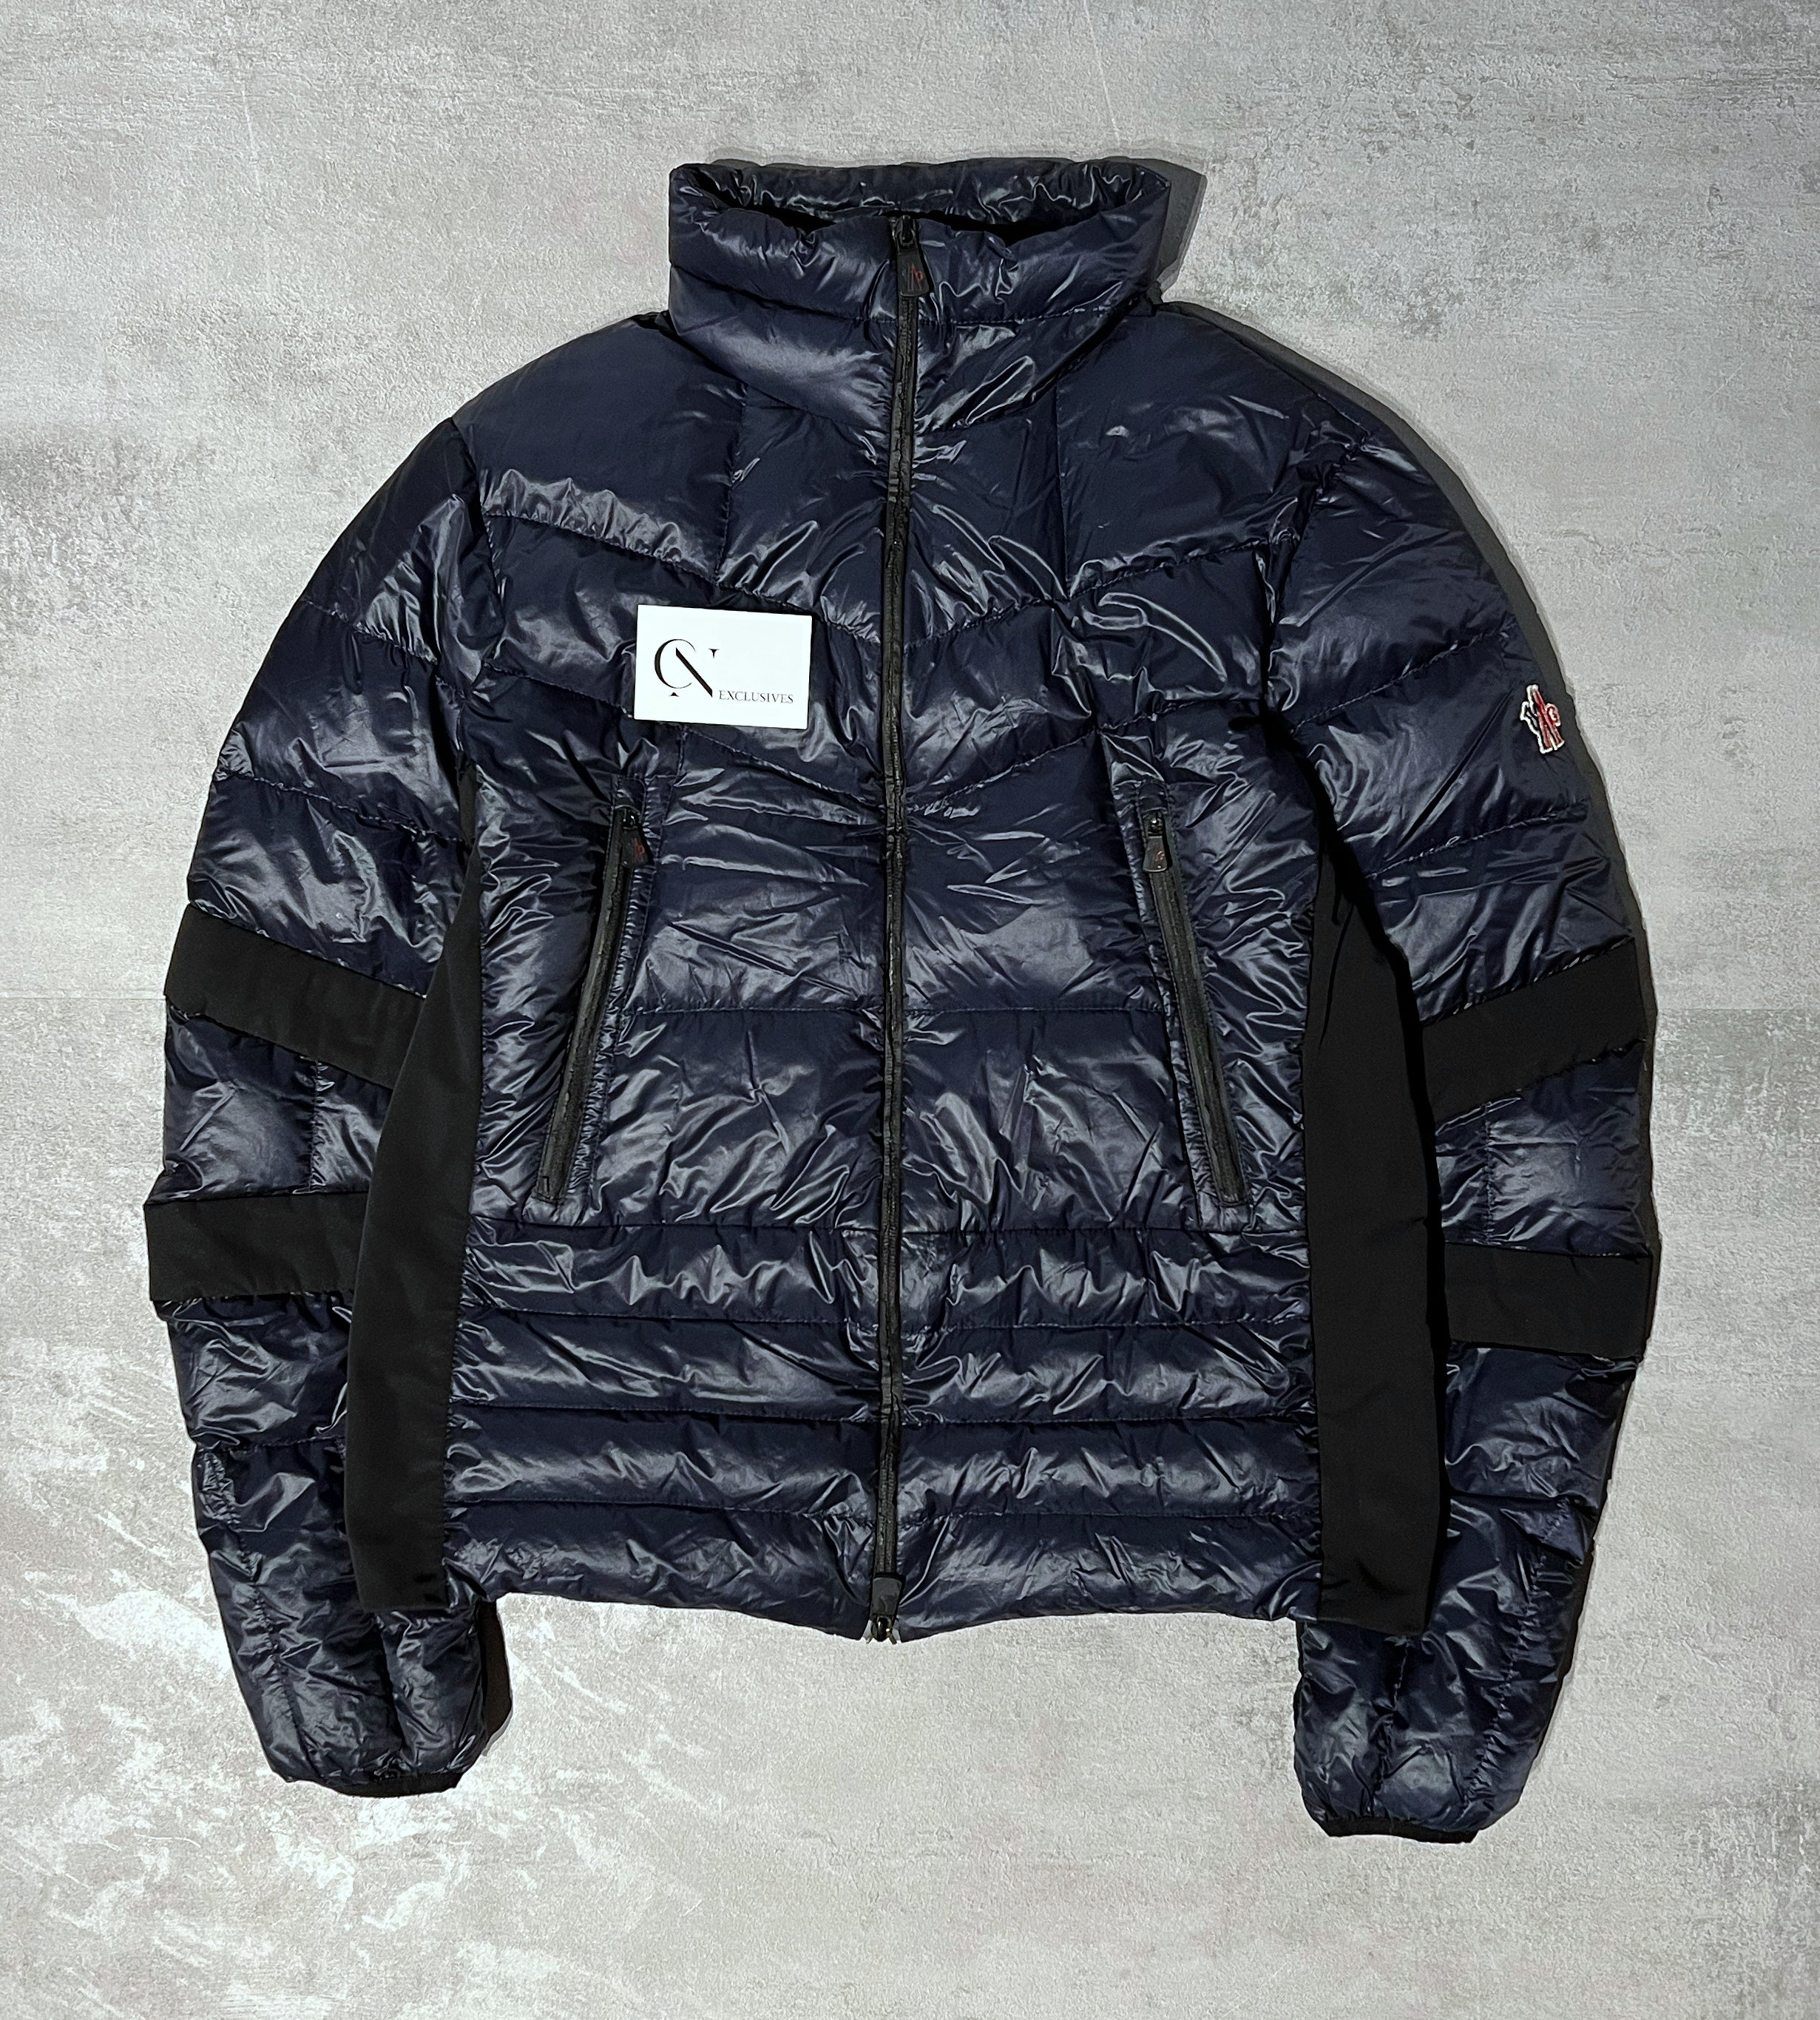 Moncler Canmore Skiing Jacket - Size 5